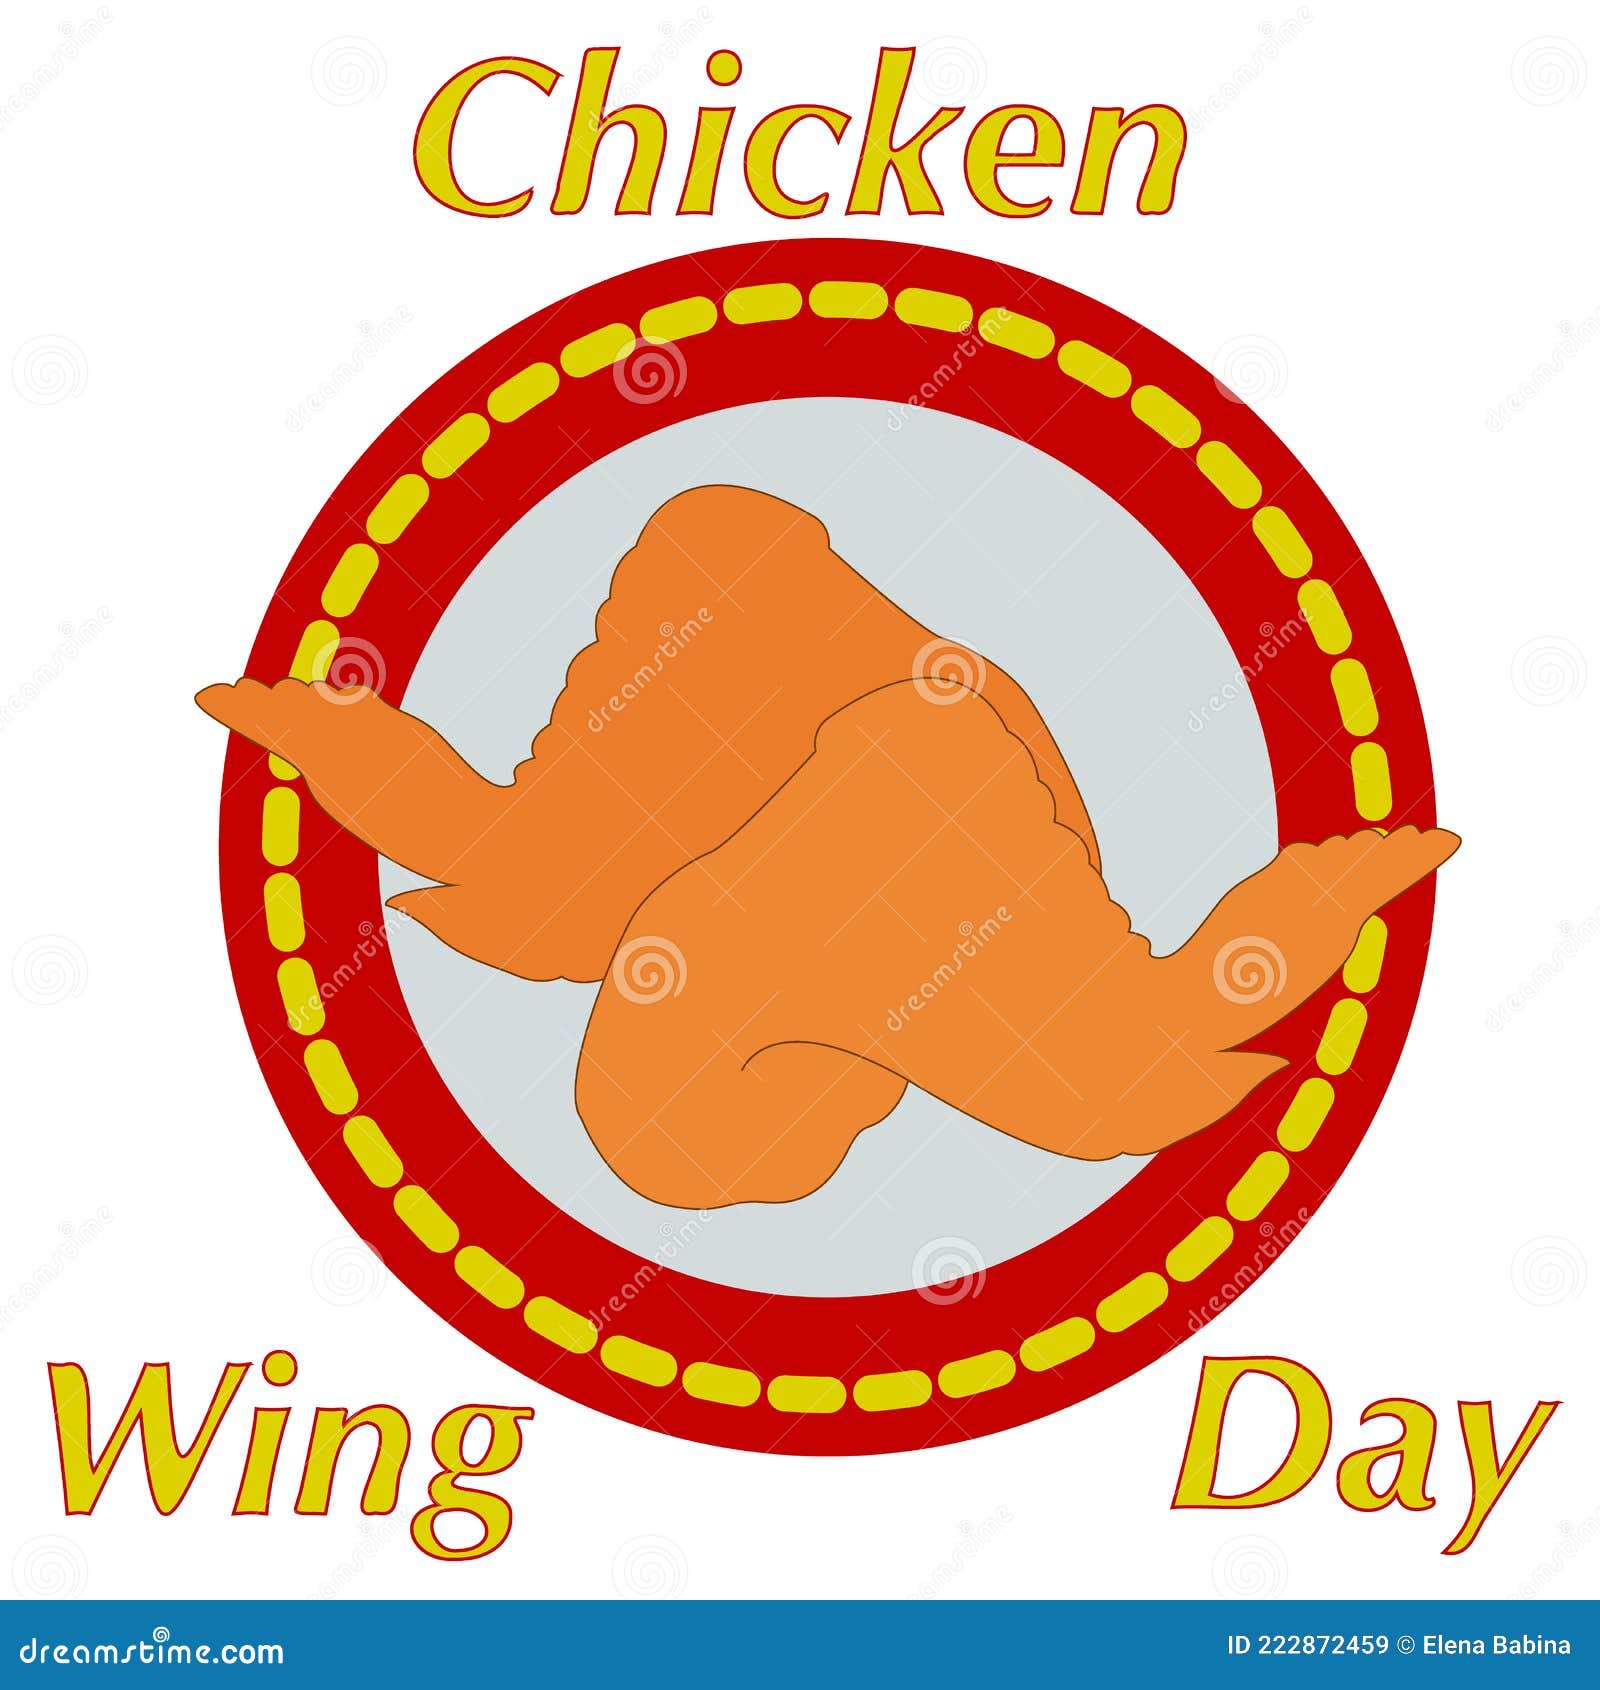 National Chicken Wings Day stock vector. Illustration of national